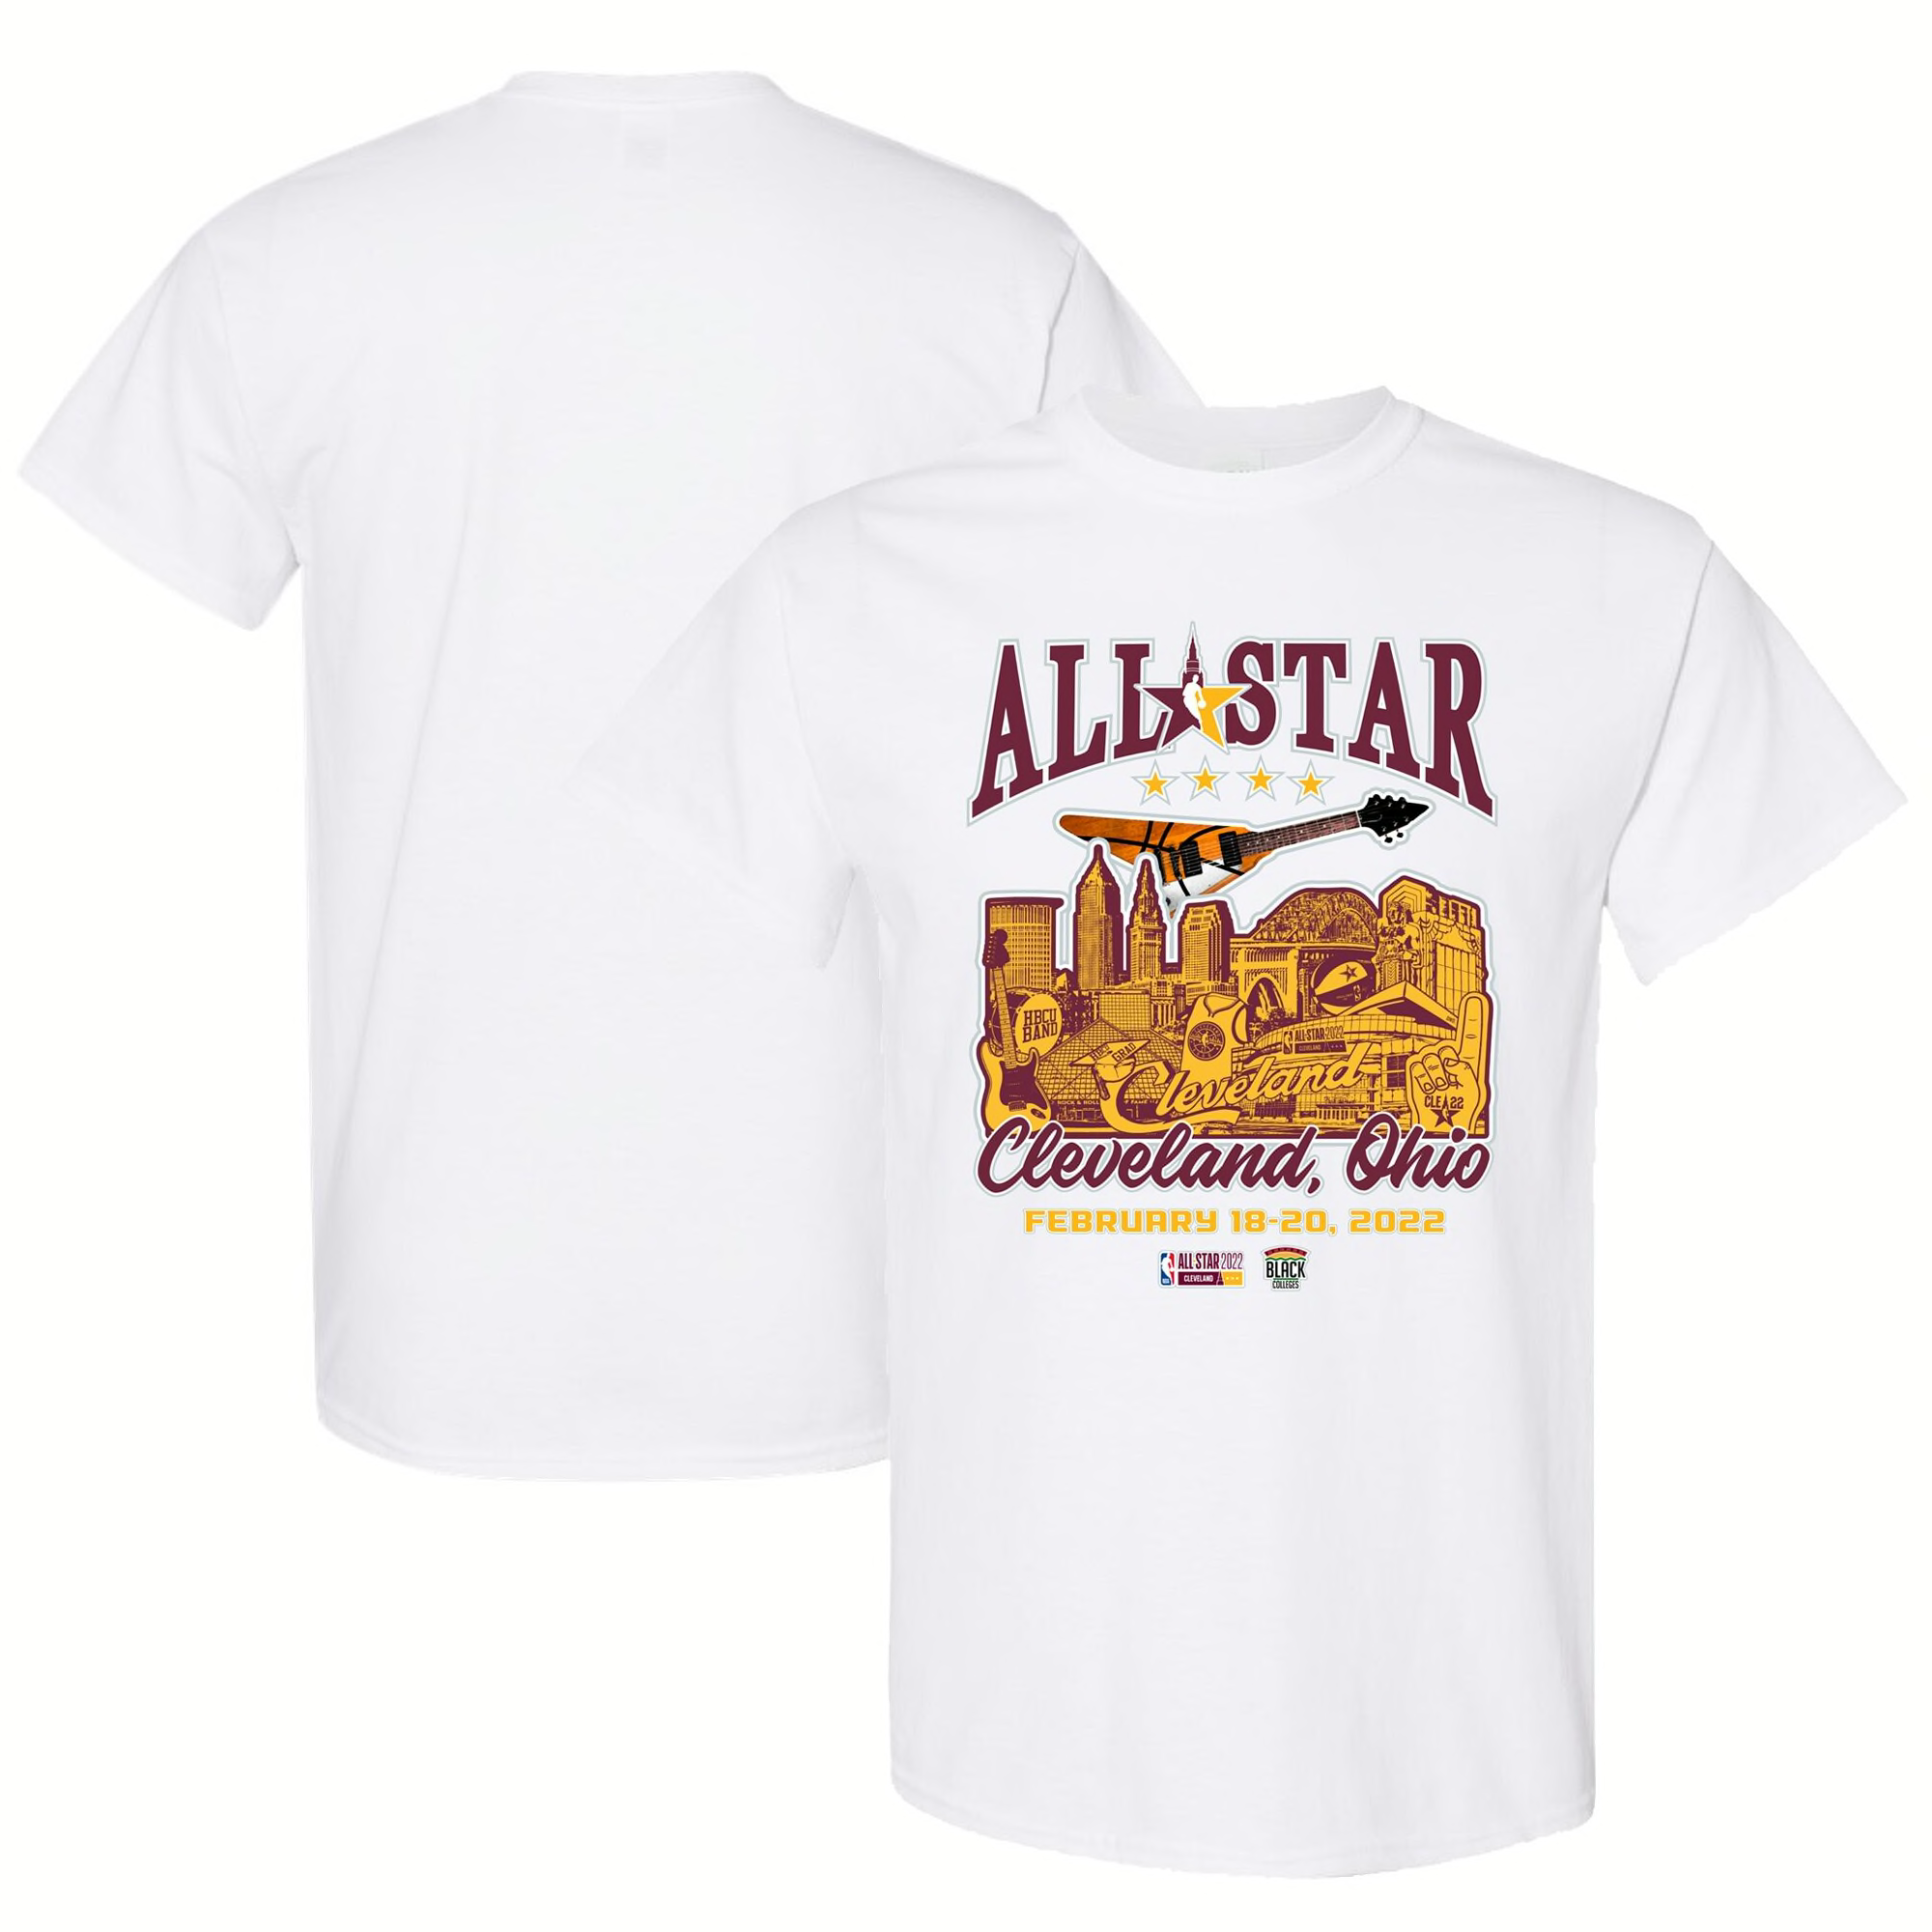 Philadelphia 76ers: Order your 2022 NBA All-Star Game gear today